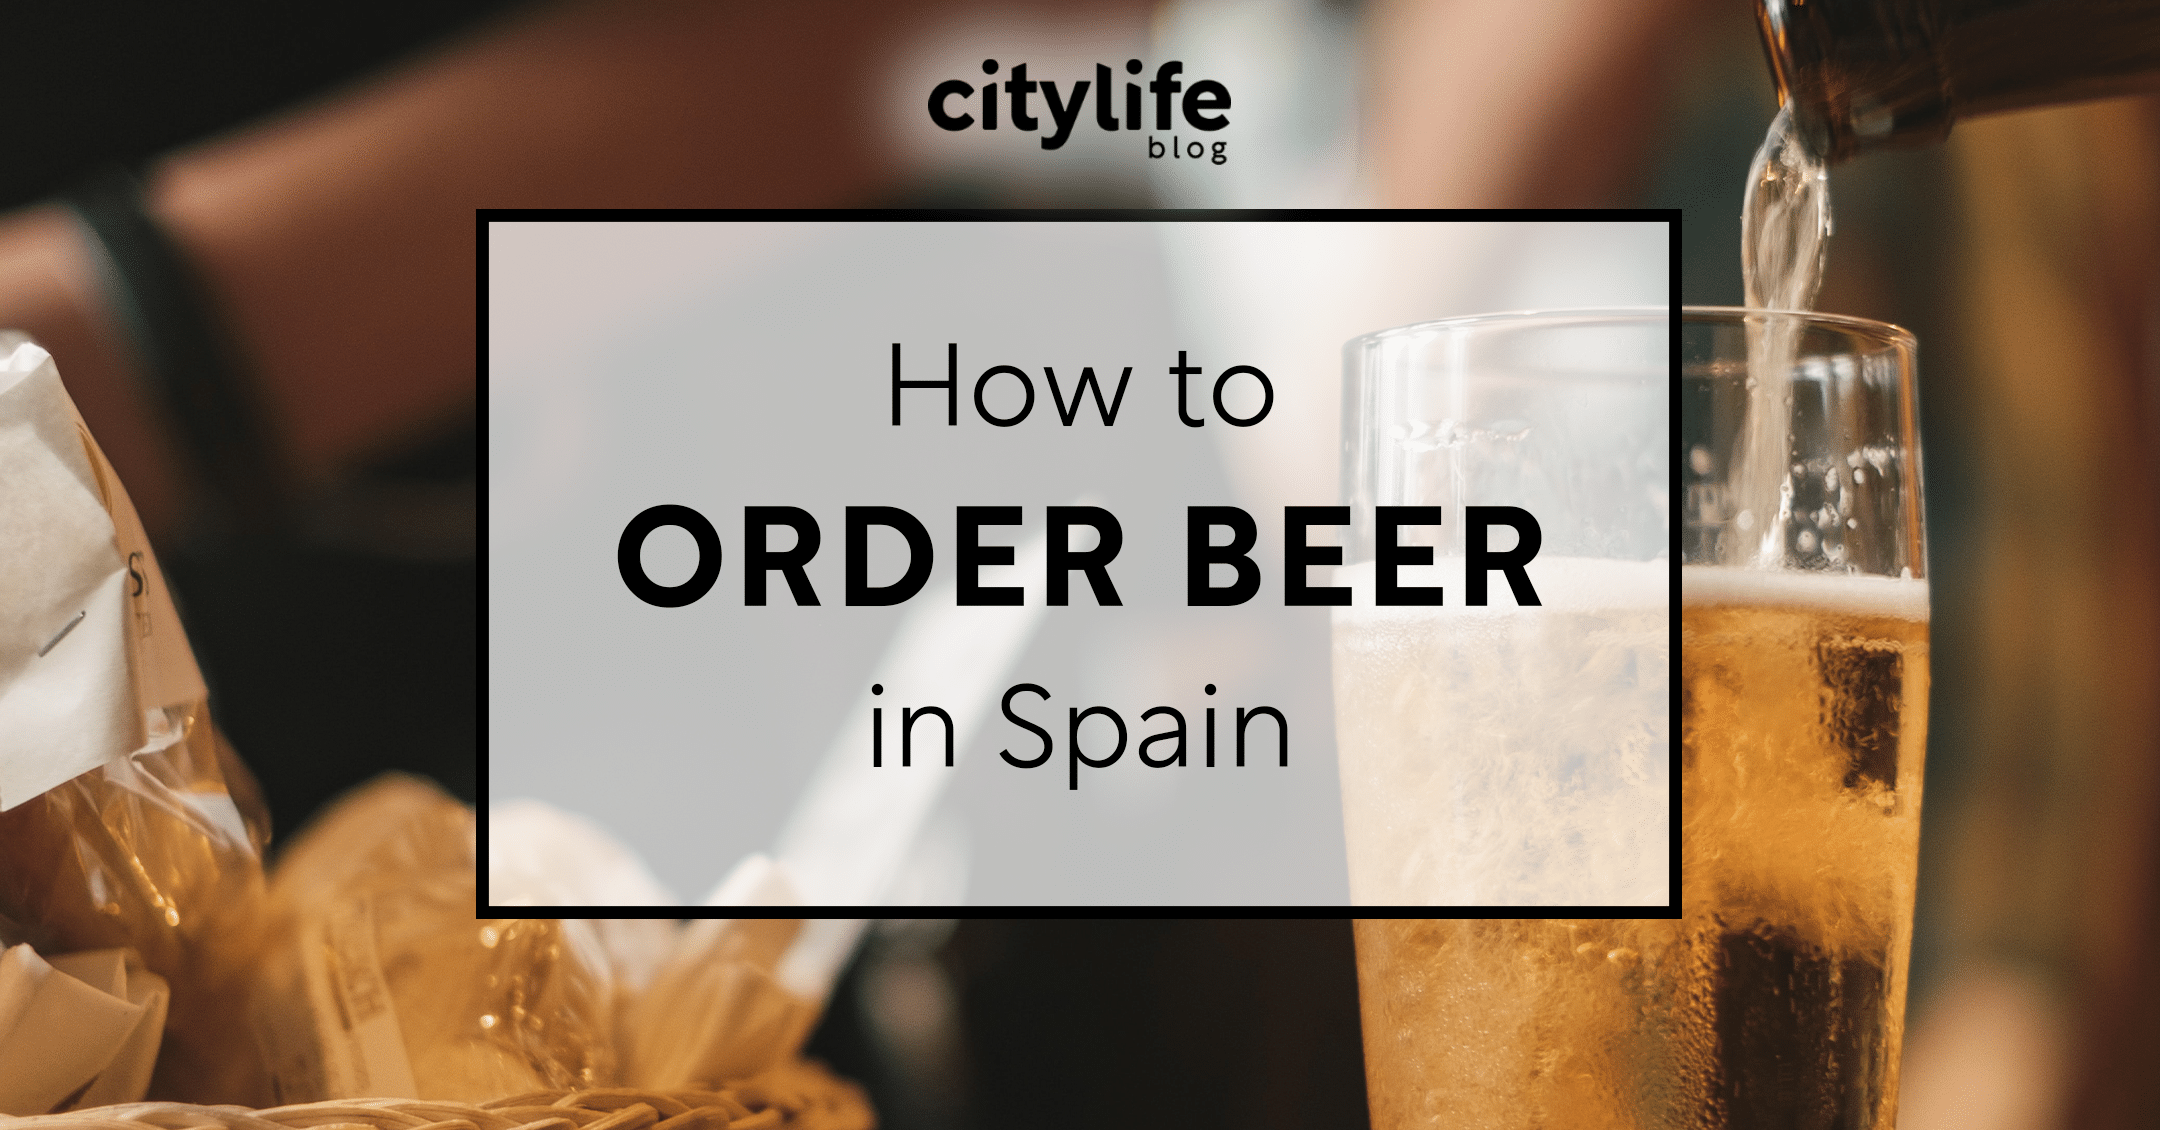 The Types of Beer Glasses You Need to Know - Buying Guides